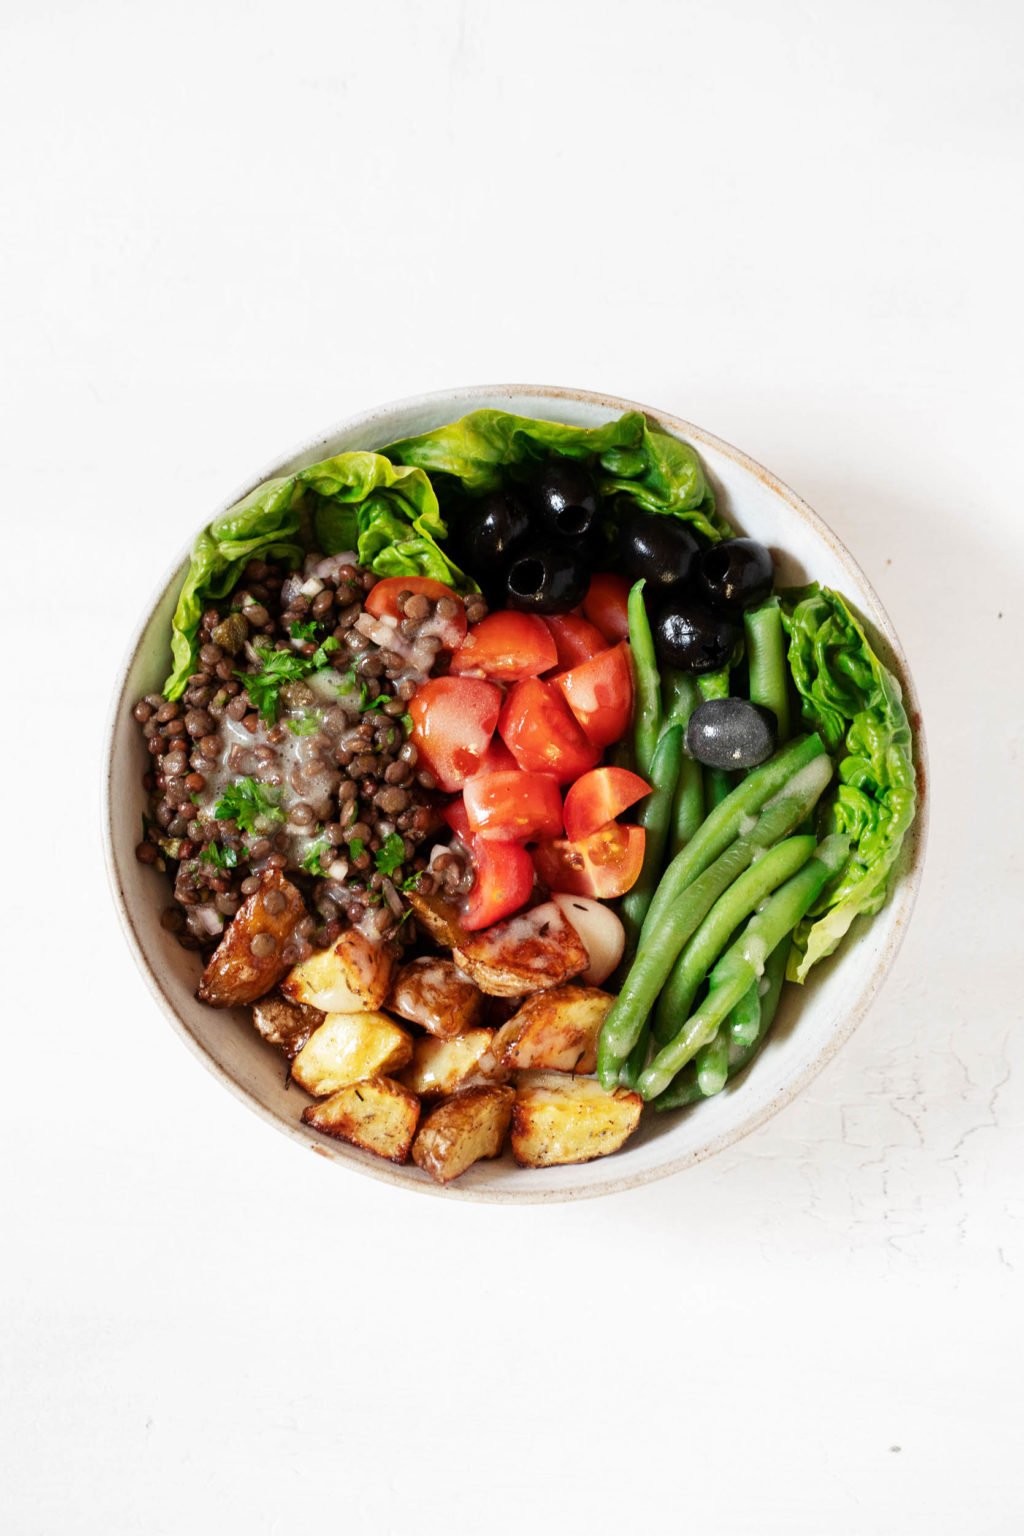 An overhead photograph of a composed salad, which has been made with an array of colorful plant-based ingredients.